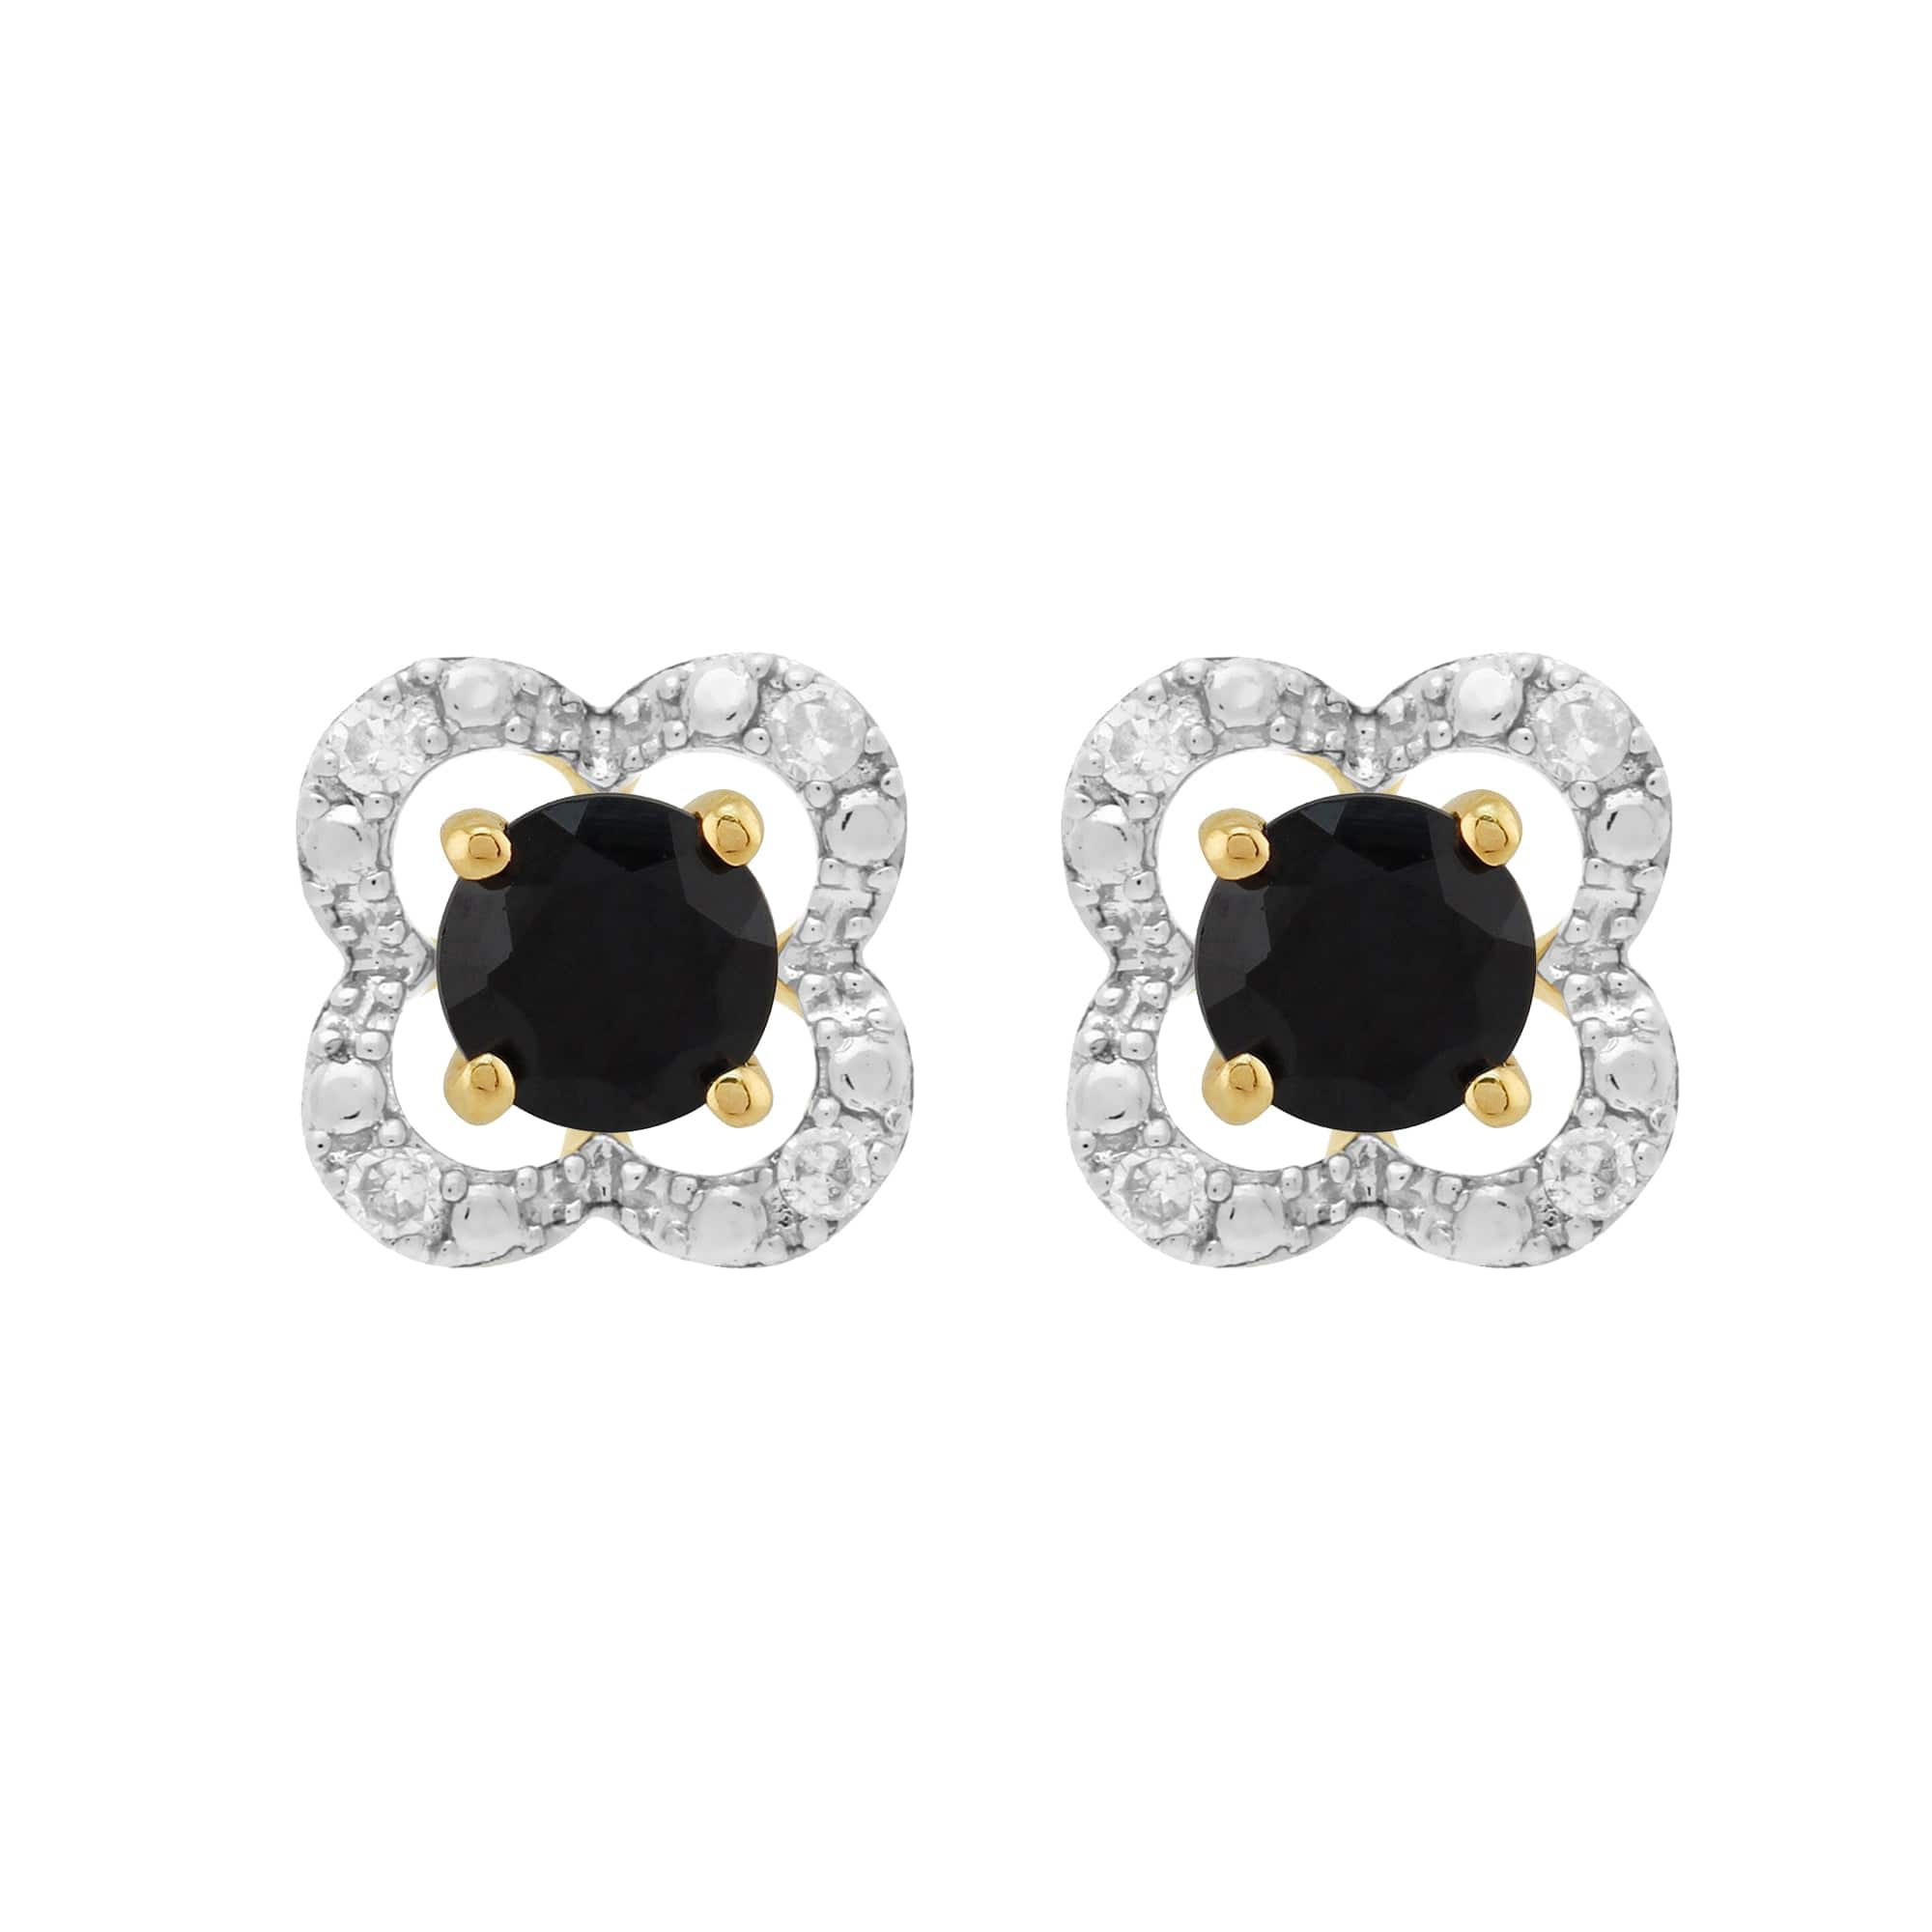 11559-191E0375019 Classic Round Dark Blue Sapphire Studs with Detachable Diamond Floral Ear Jacket in 9ct Yellow Gold 1